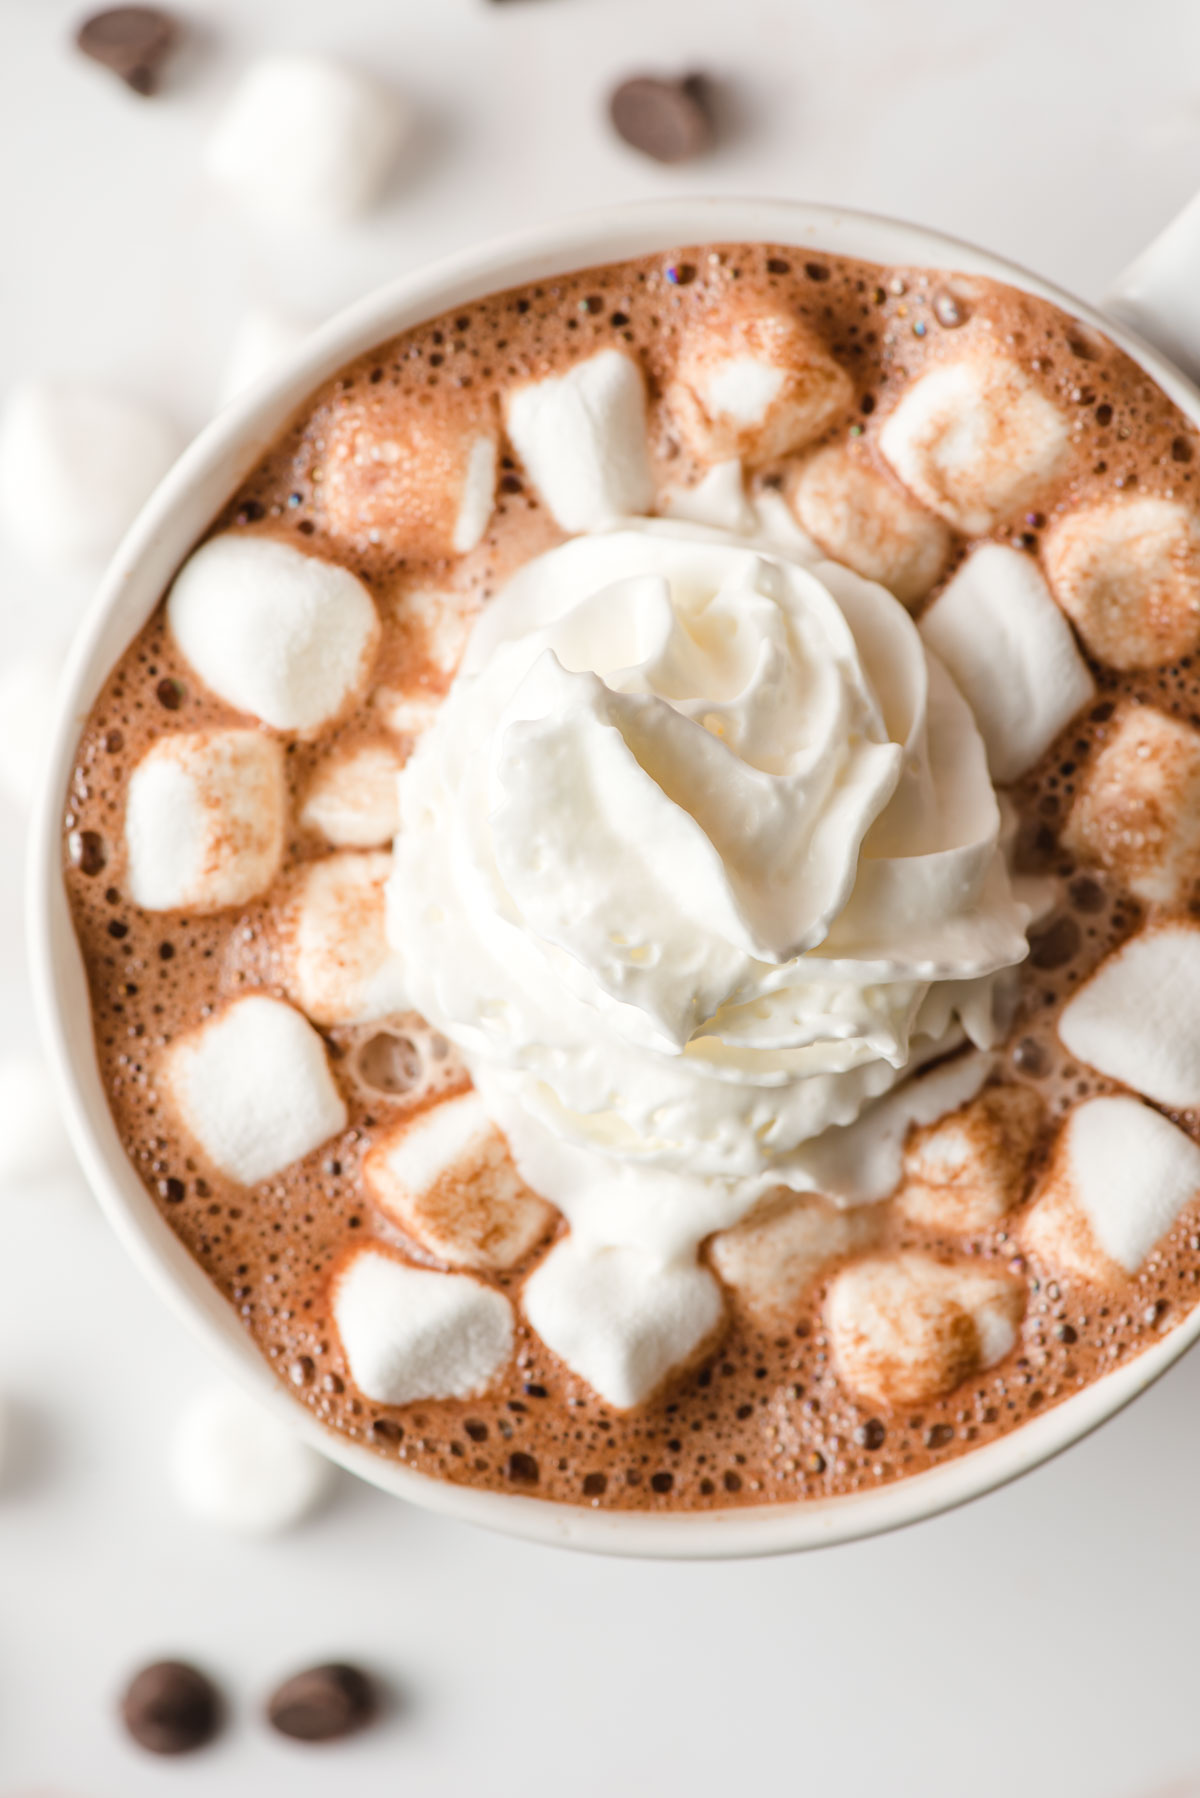 Top down image of hot chocote topped with whipped cream and marshmallows.